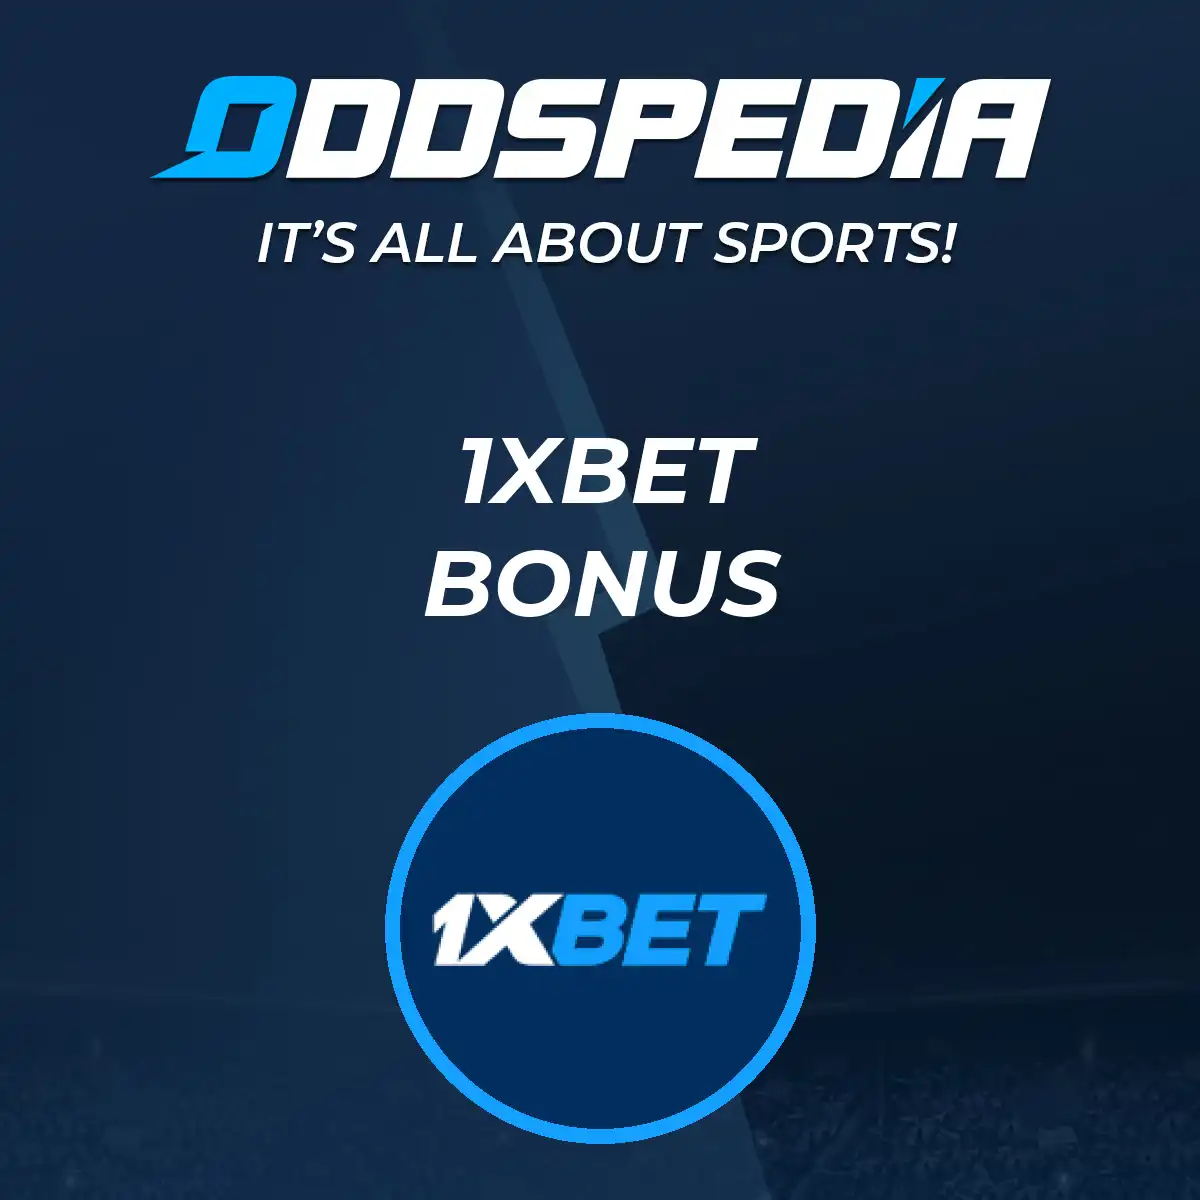 9 Easy Ways To 1xBet Without Even Thinking About It